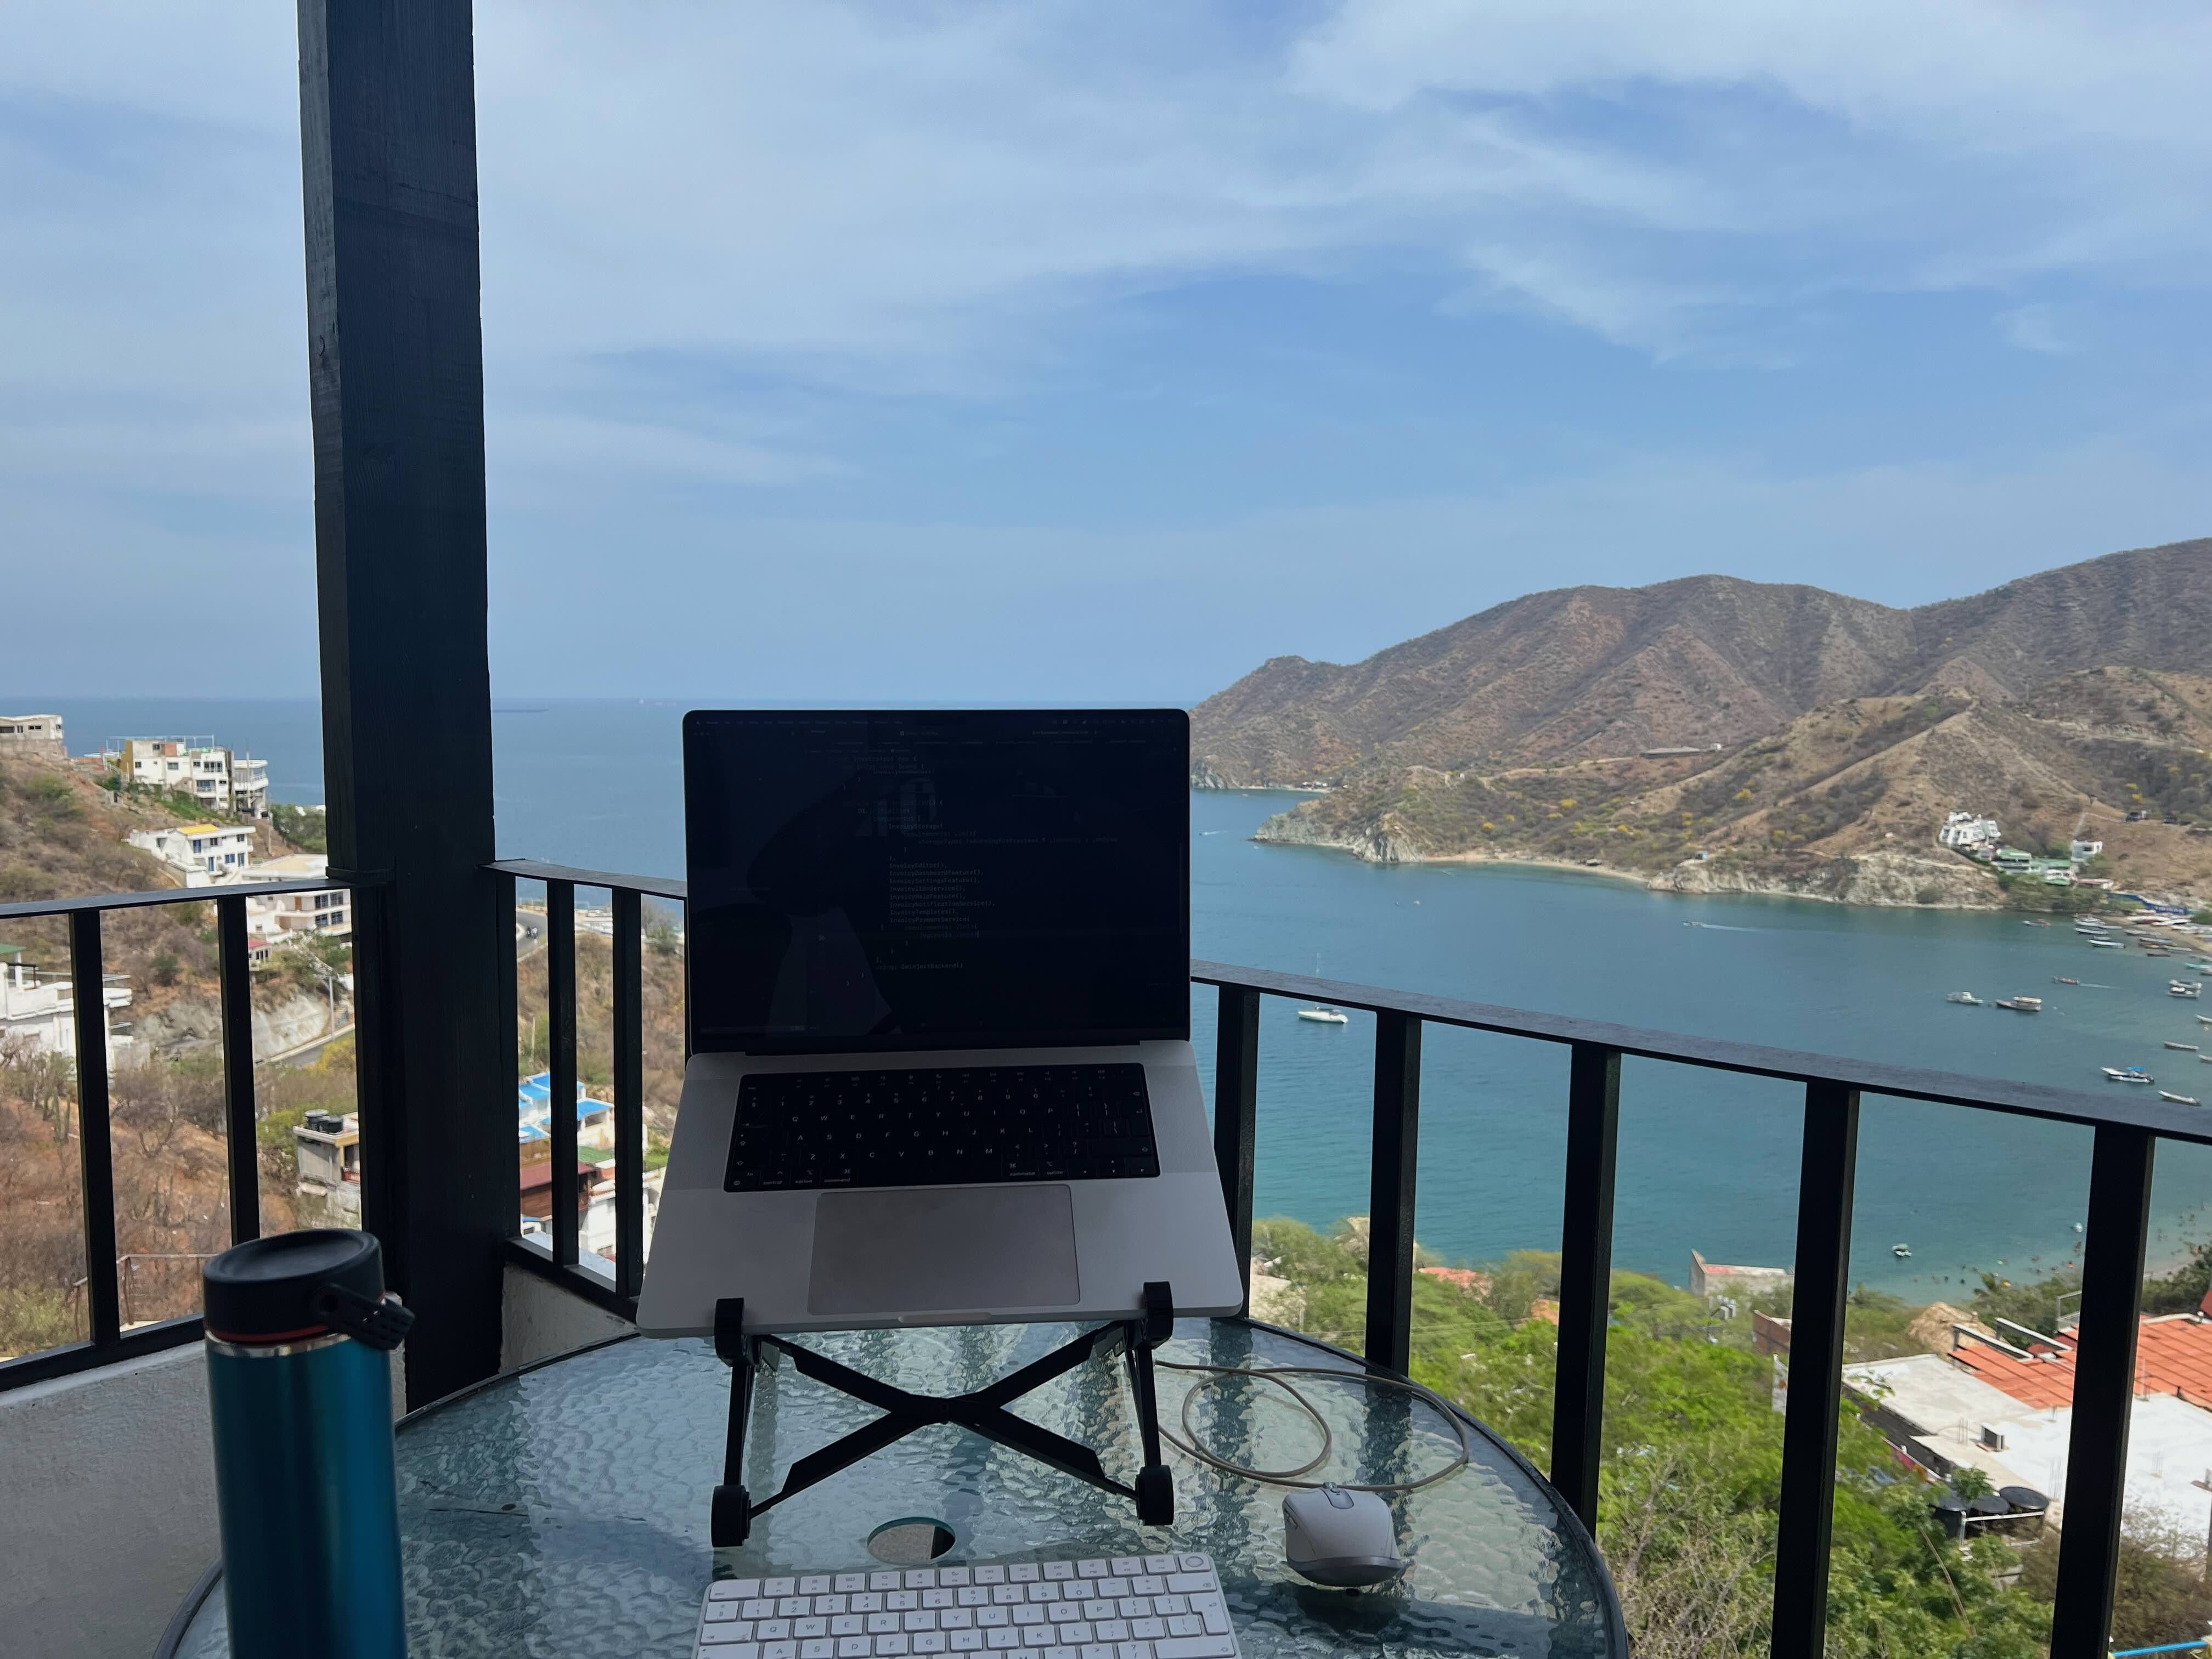 
A laptop on a stand sits on a glass table with a keyboard, mouse, and water bottle, overlooking a scenic coastal view of Taganga, Colombia, with mountains and the sea in the background.